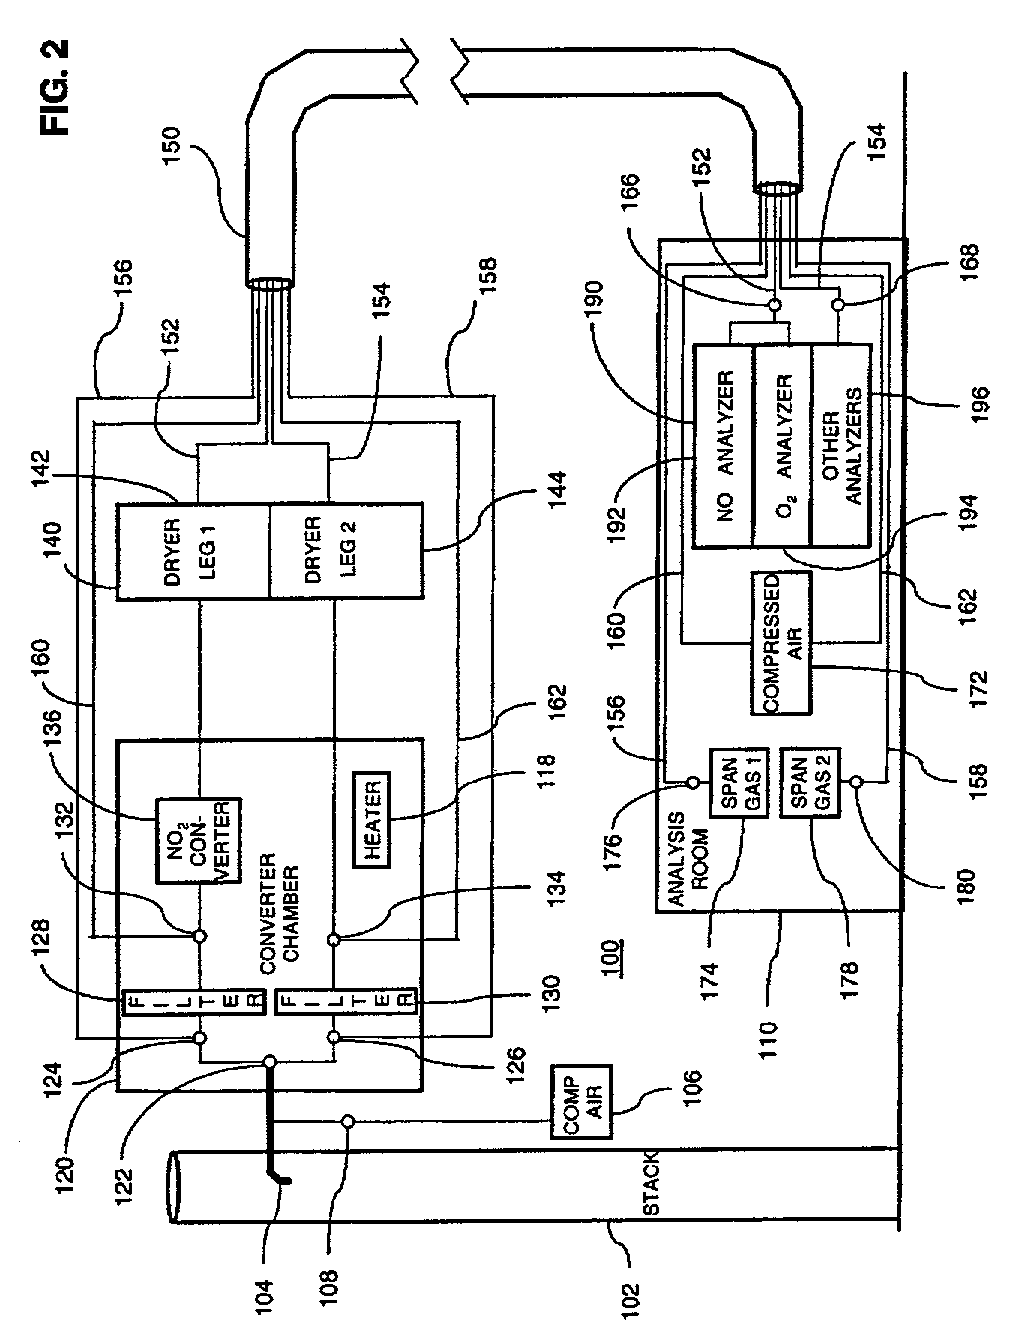 Method of determining measurement bias in an emissions monitoring system